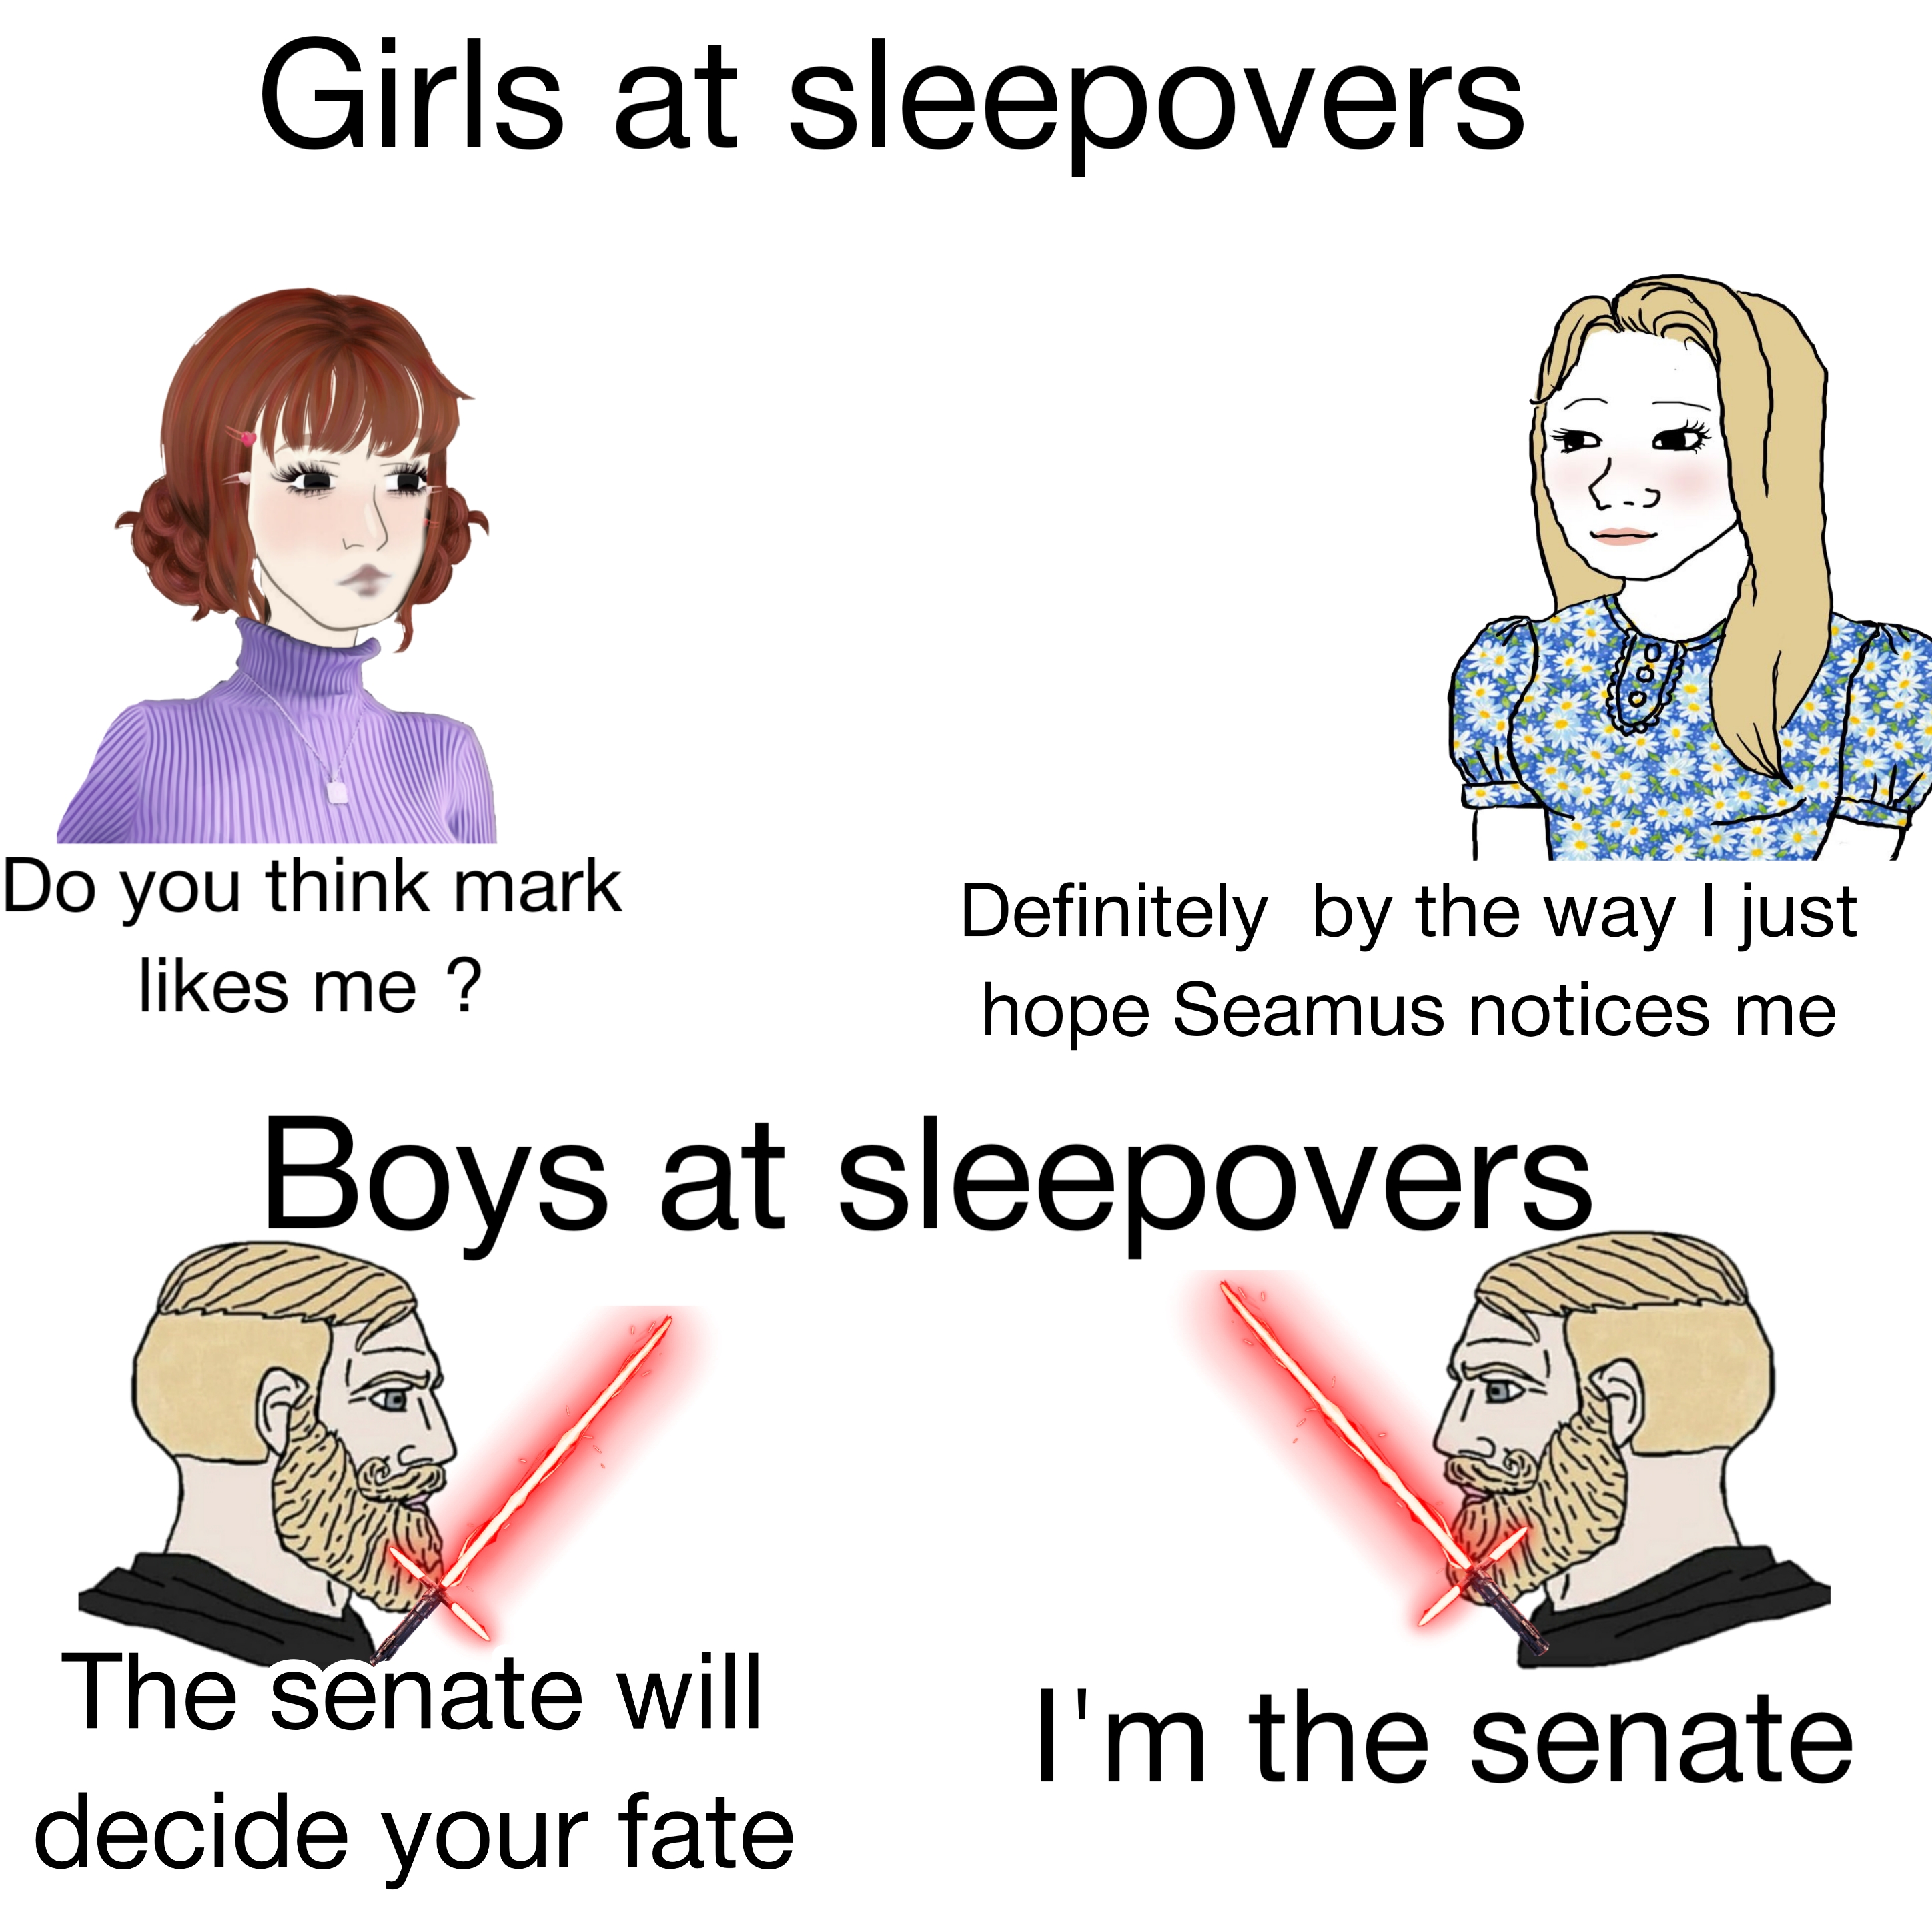 funny memes - dank memes - cartoon - Girls at sleepovers Do you think mark me ? Definitely by the way I just hope Seamus notices me Boys at sleepovers The senate will decide your fate I'm the senate